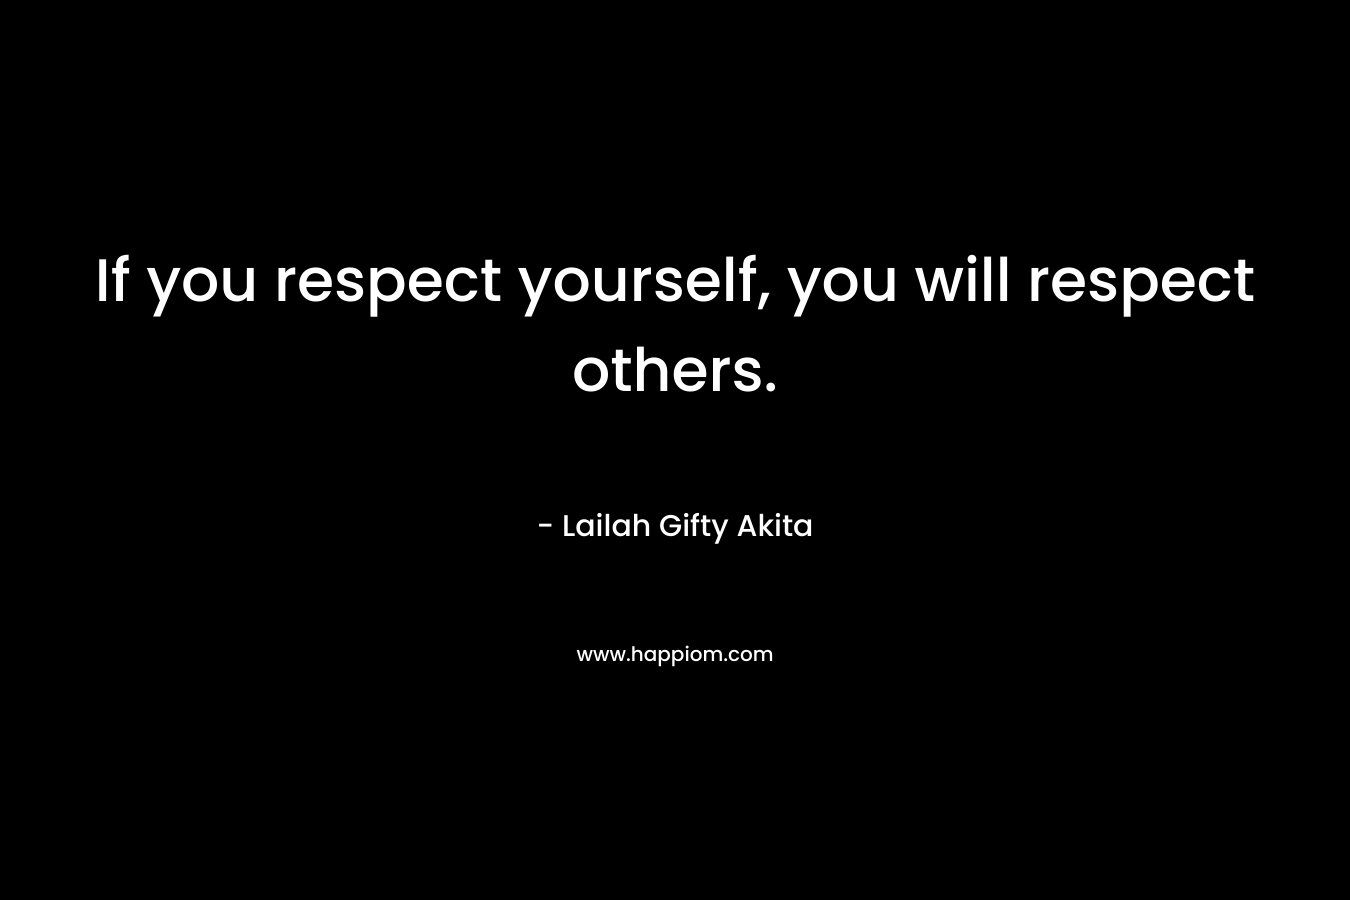 If you respect yourself, you will respect others.